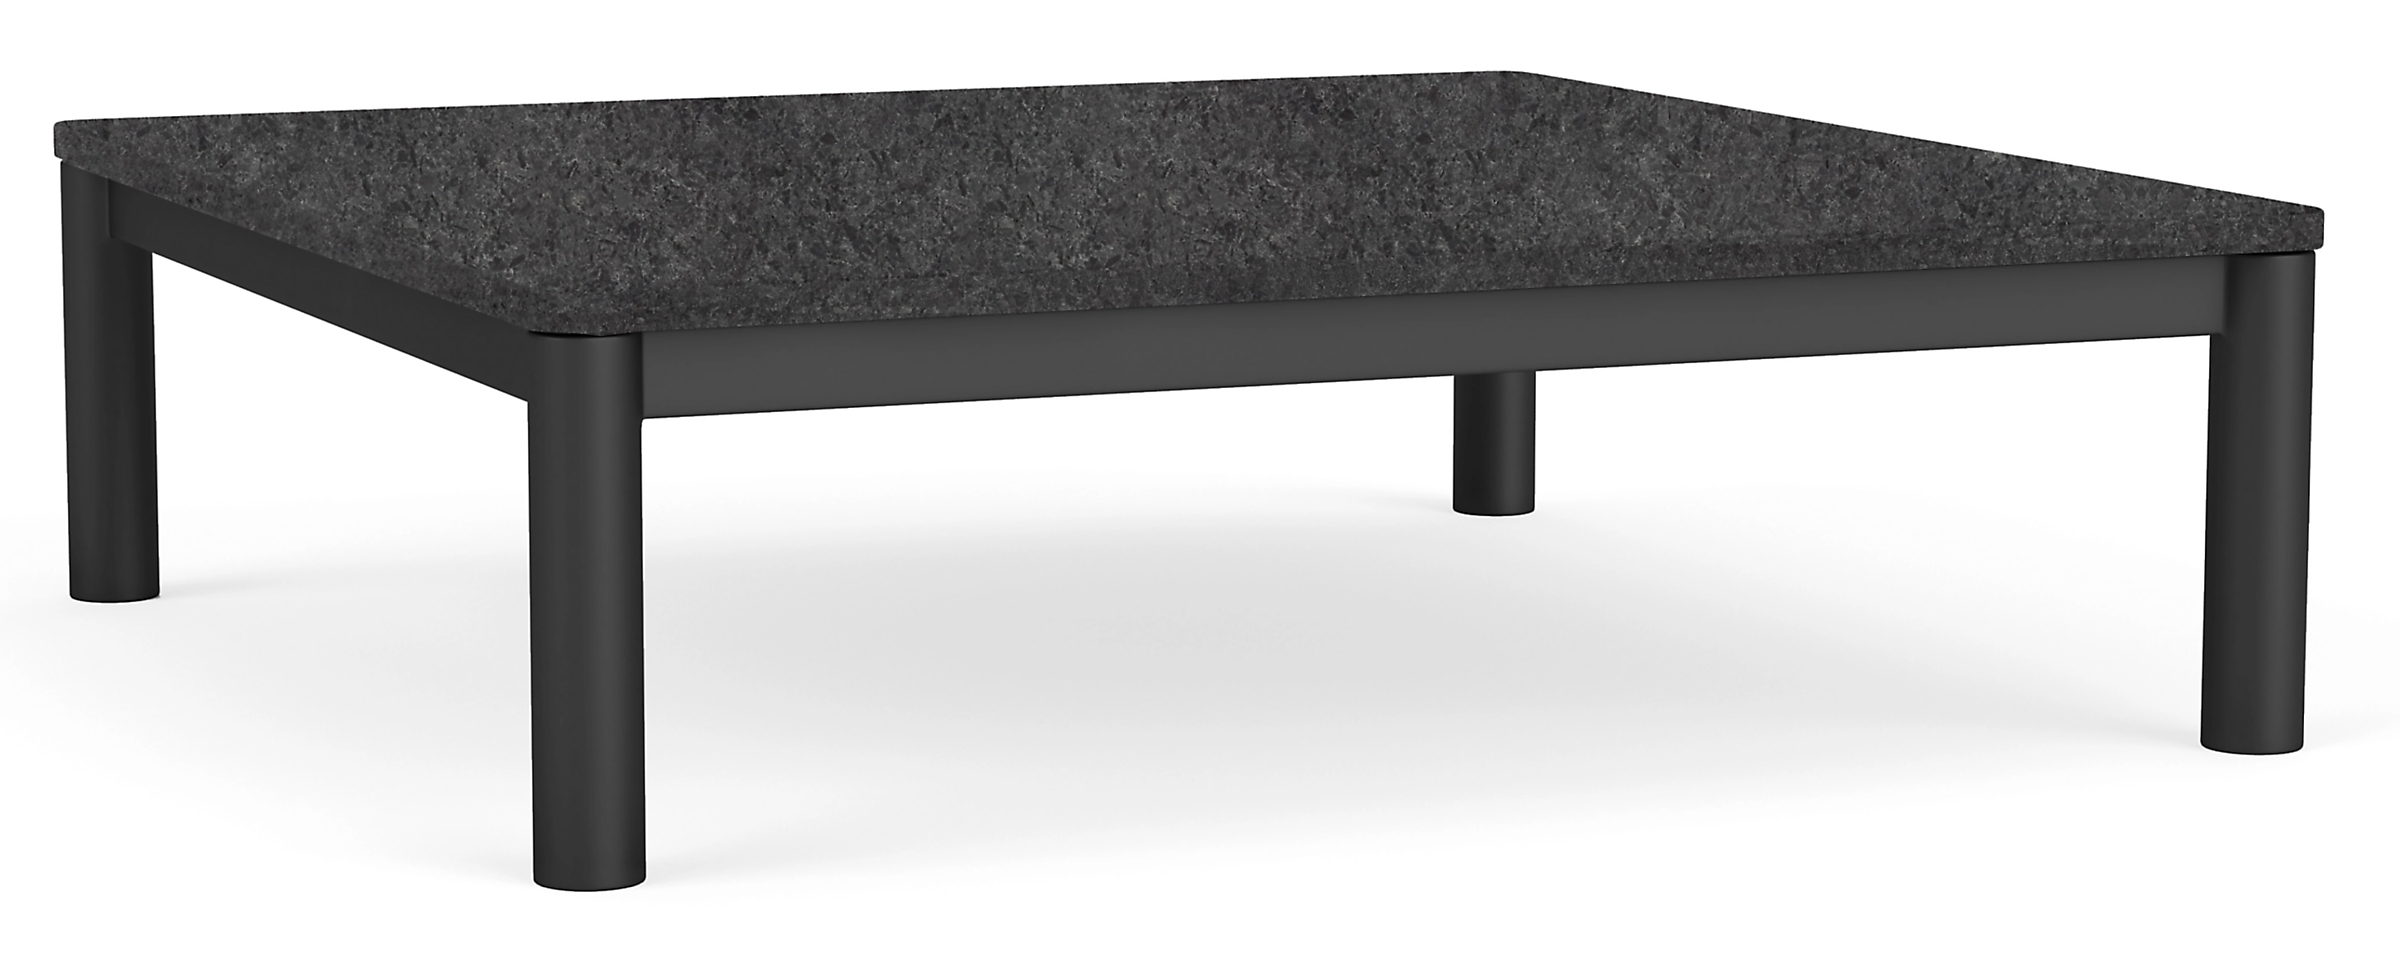 Westbrook 36w 36d 11h Coffee Table with Mesabi Black Top & Graphite Base